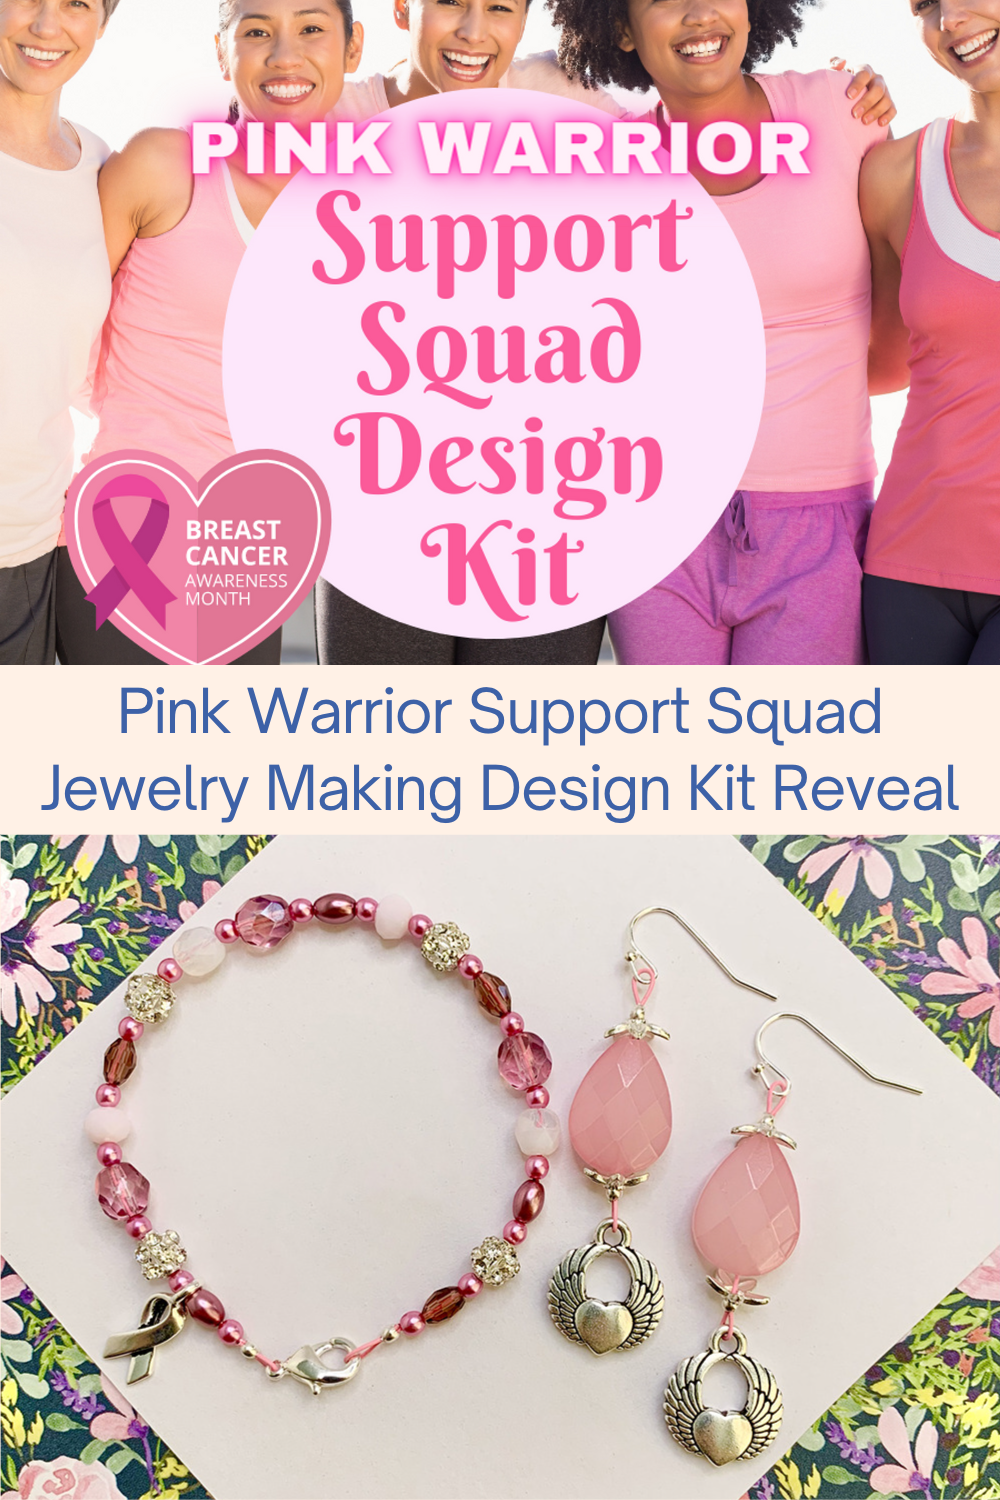 Pink Warrior Support Squad Jewelry Making Design Kit Reveal Collage